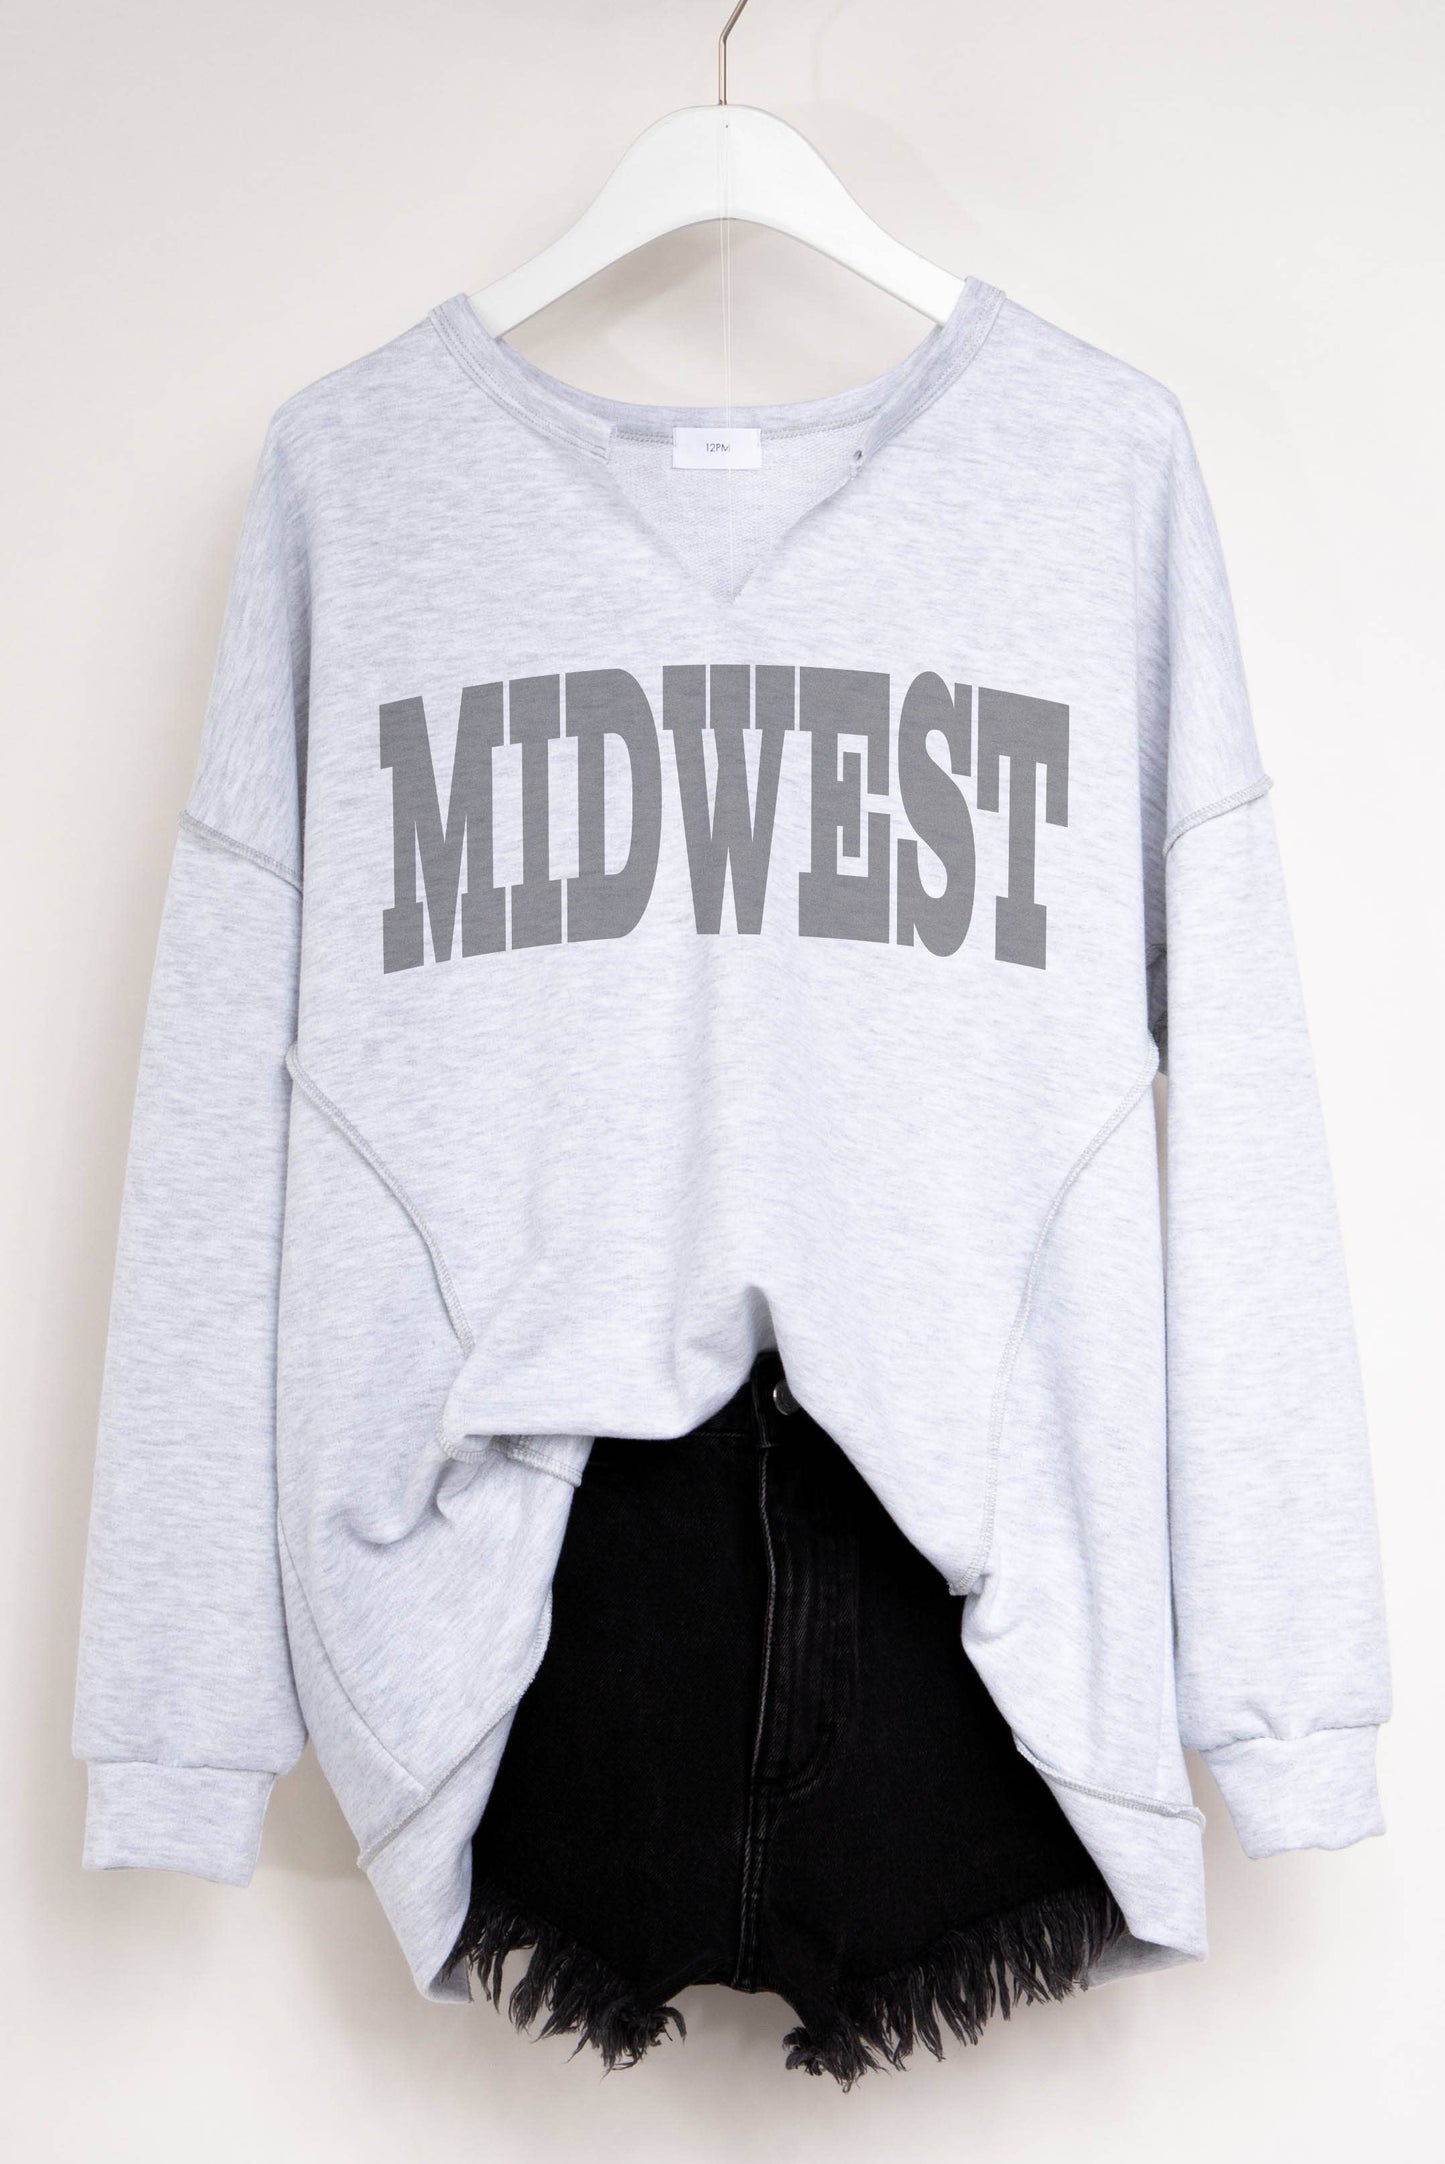 Midwest Graphic Light Sweater